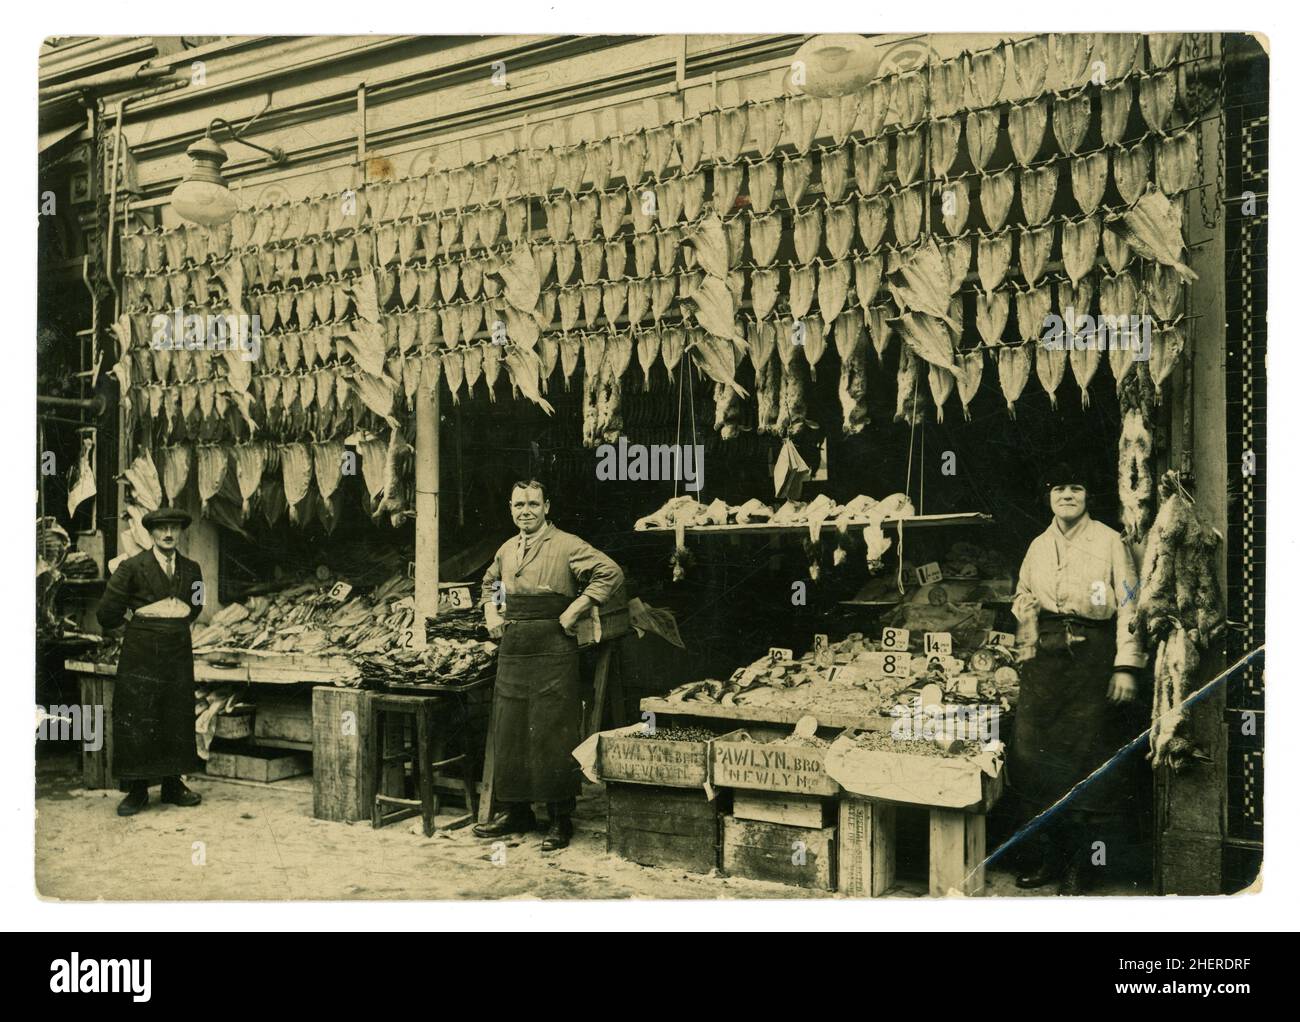 Original early 1900's, WW1 era photo of fishmongers, fish fillets hanging up in front of shop, crates of shellfish from Newyln, Cornwall, on display in wood crates at front of stall at a location in the Lavender Hill area of London, U.K. circa 1914-1918. Stock Photo